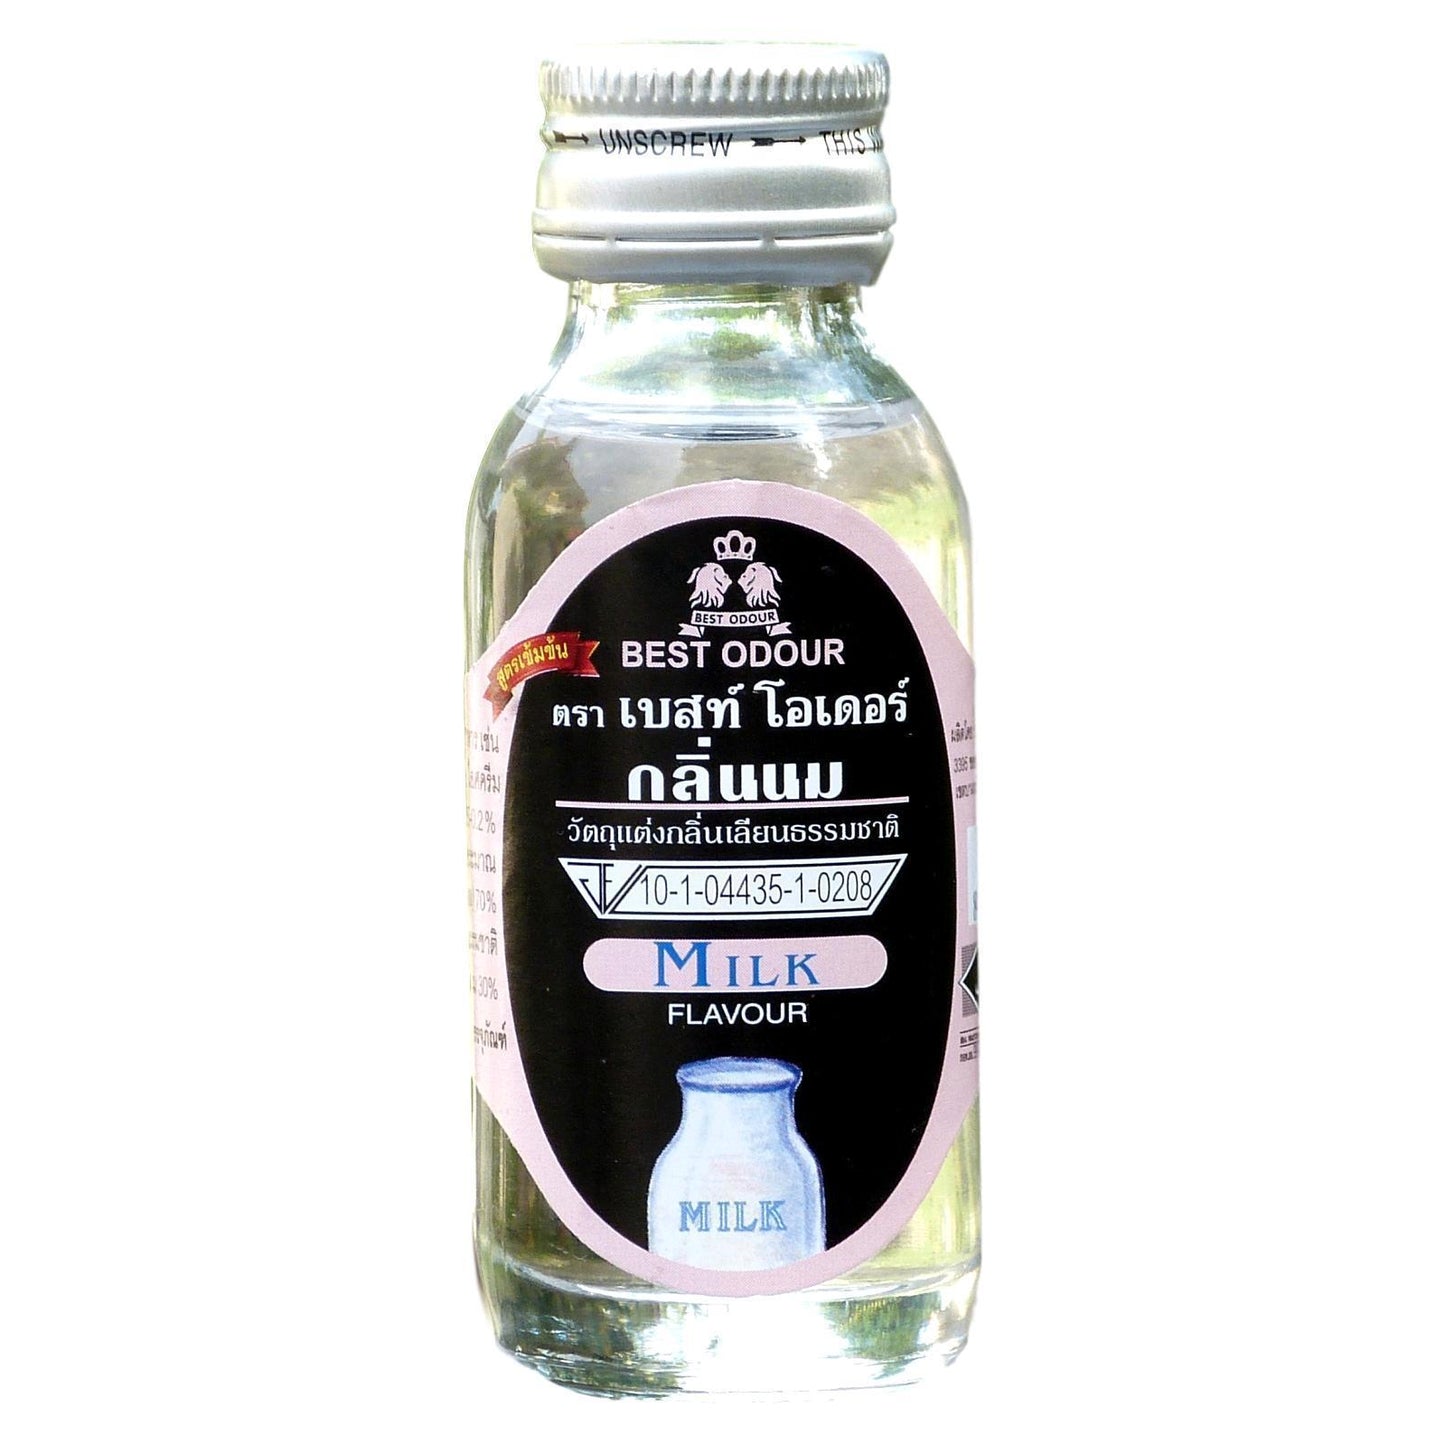 Best Odour Milk Flavor for Thai Food and Drinks 30ml - Asian Beauty Supply